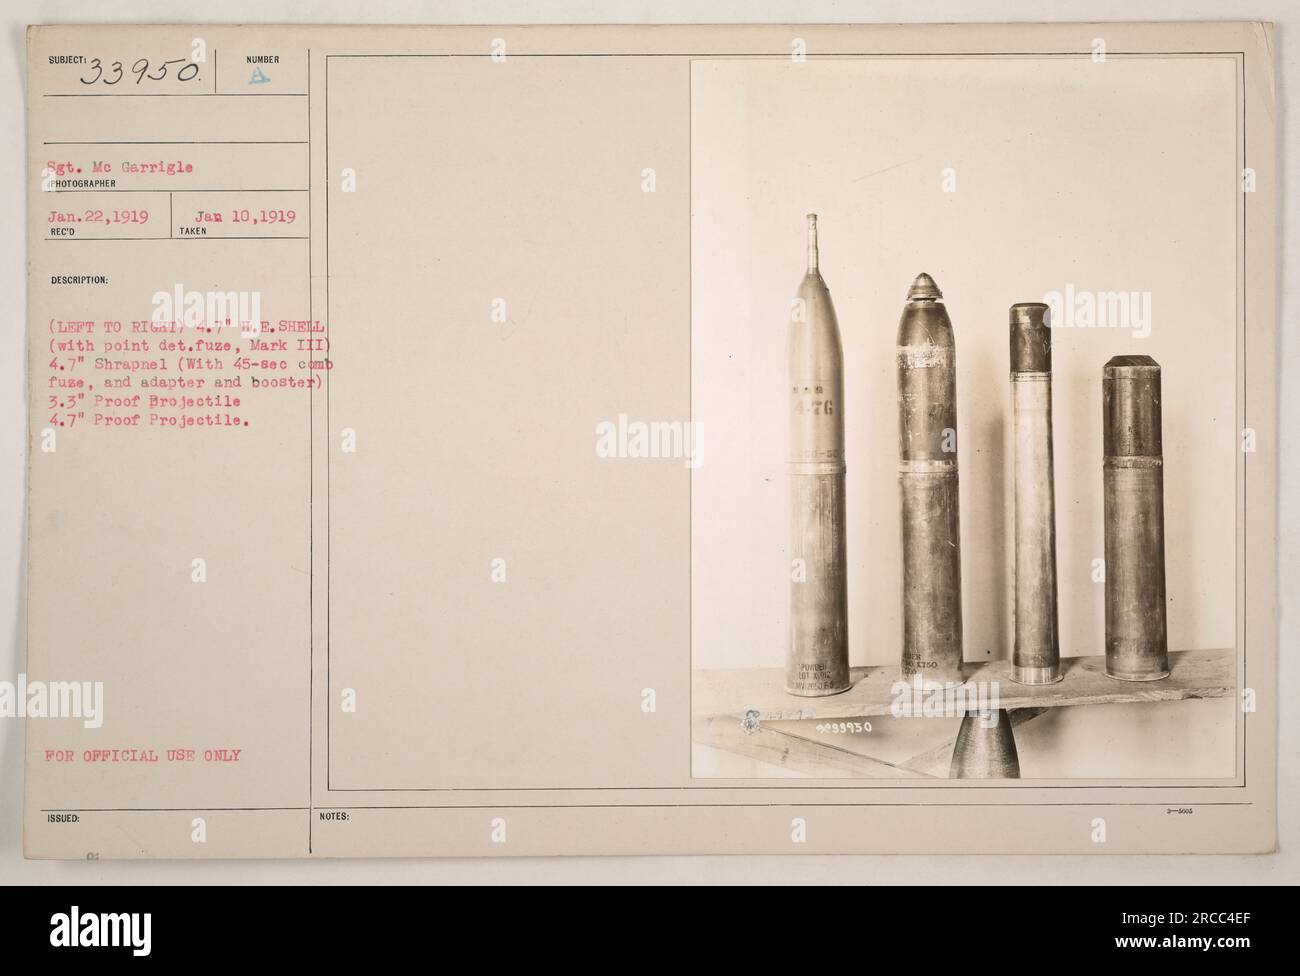 This image shows four types of artillery projectiles used during World War One. From left to right, they are a 4.7' high-explosive shell with point detonating fuze, a 4.7' shrapnel shell with a 45-second combination fuse and adapter, a 3.3' proof projectile, and another 4.7' proof projectile. The photograph was taken on January 22, 1919, by Sgt. Me Garrigle. Stock Photo